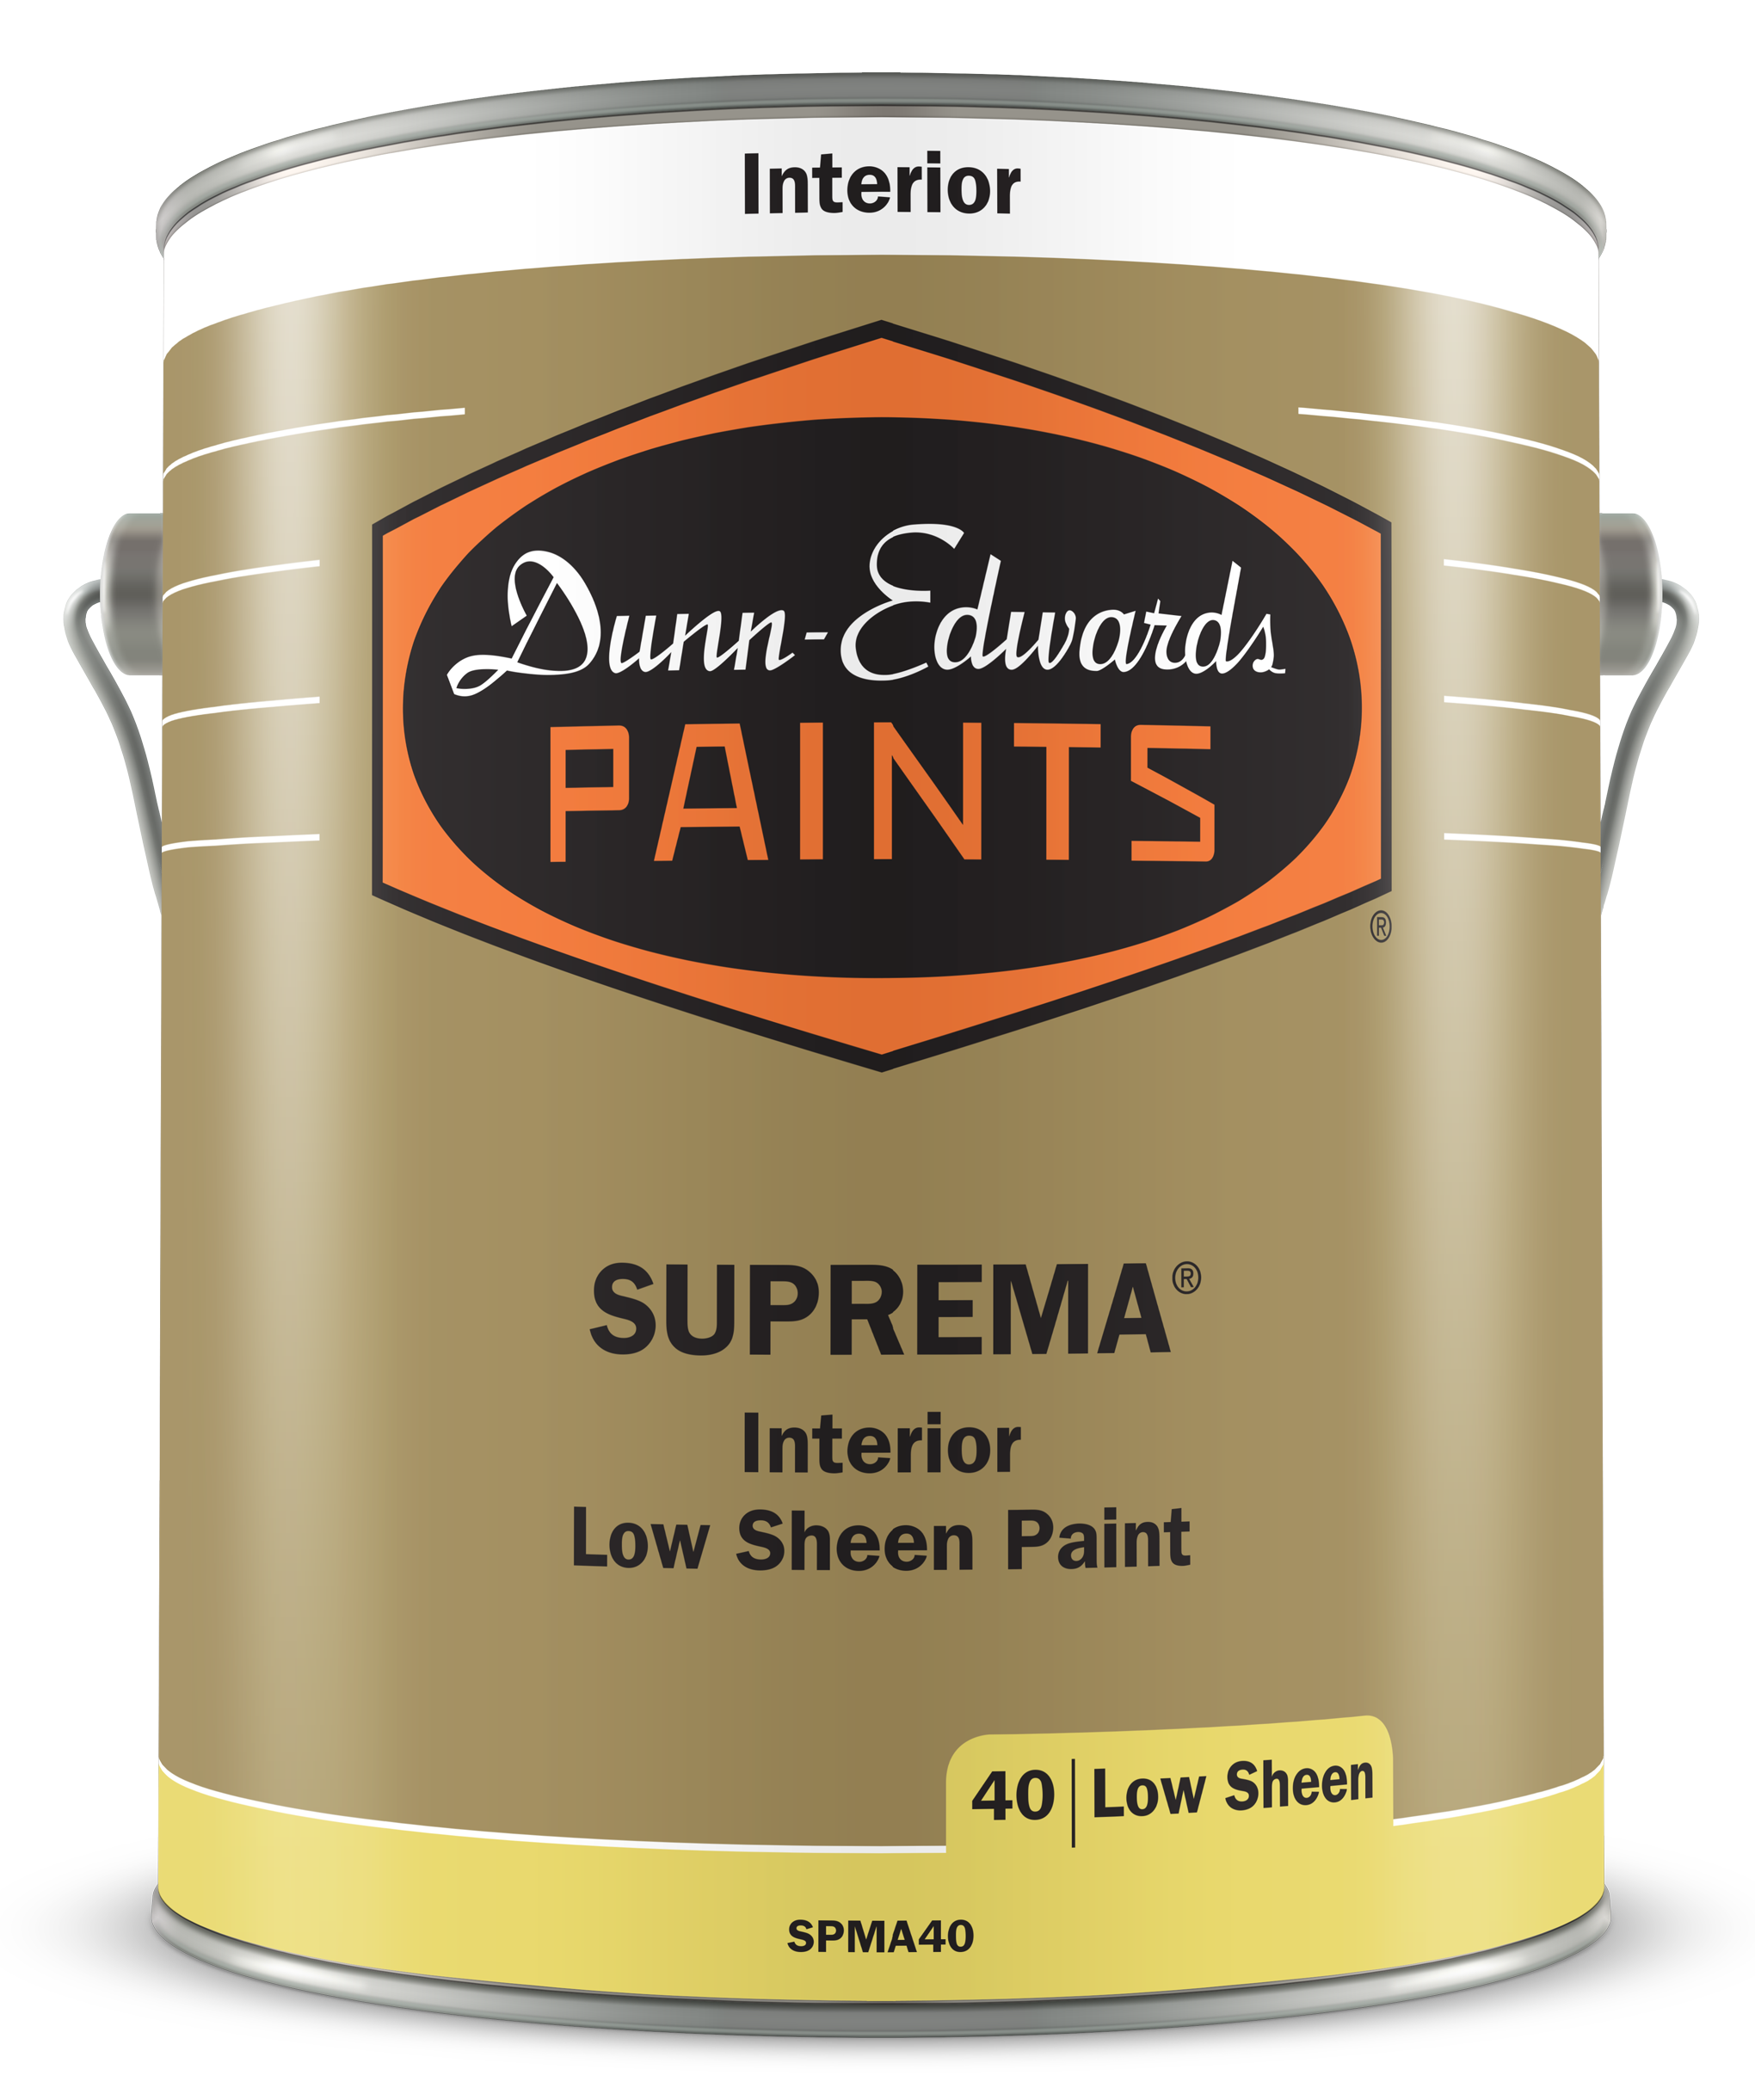 SUPREMA Interior Low Sheen Paint Can